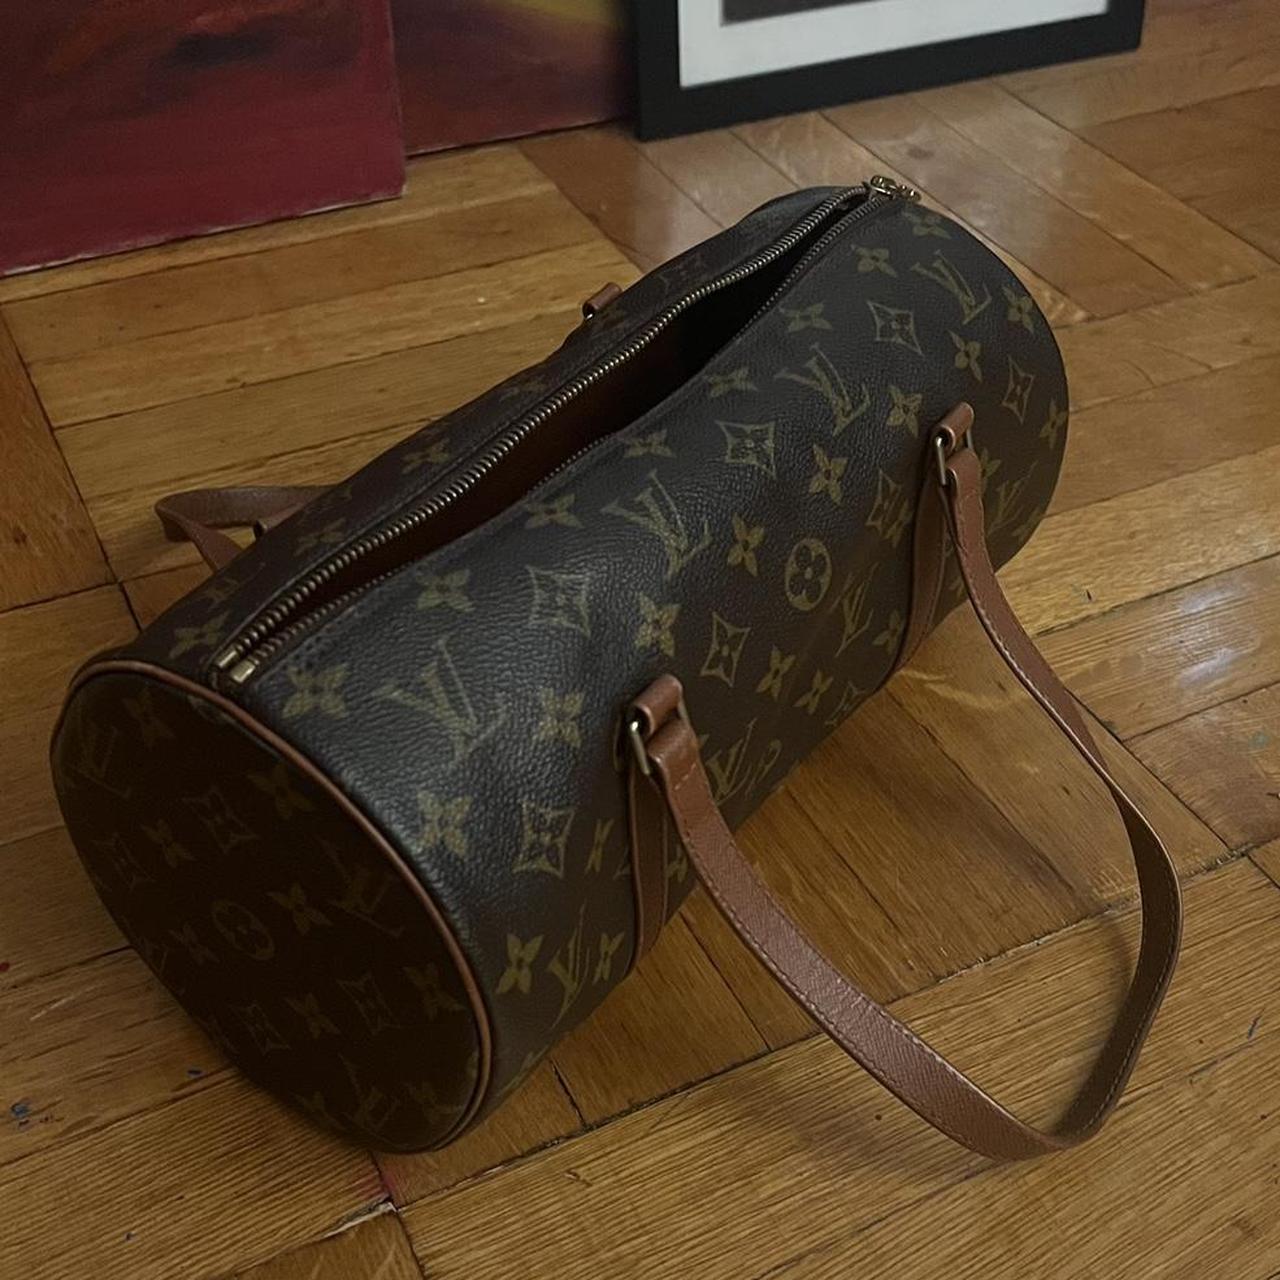 Brand new Louis Vuitton bag only used once. I got - Depop